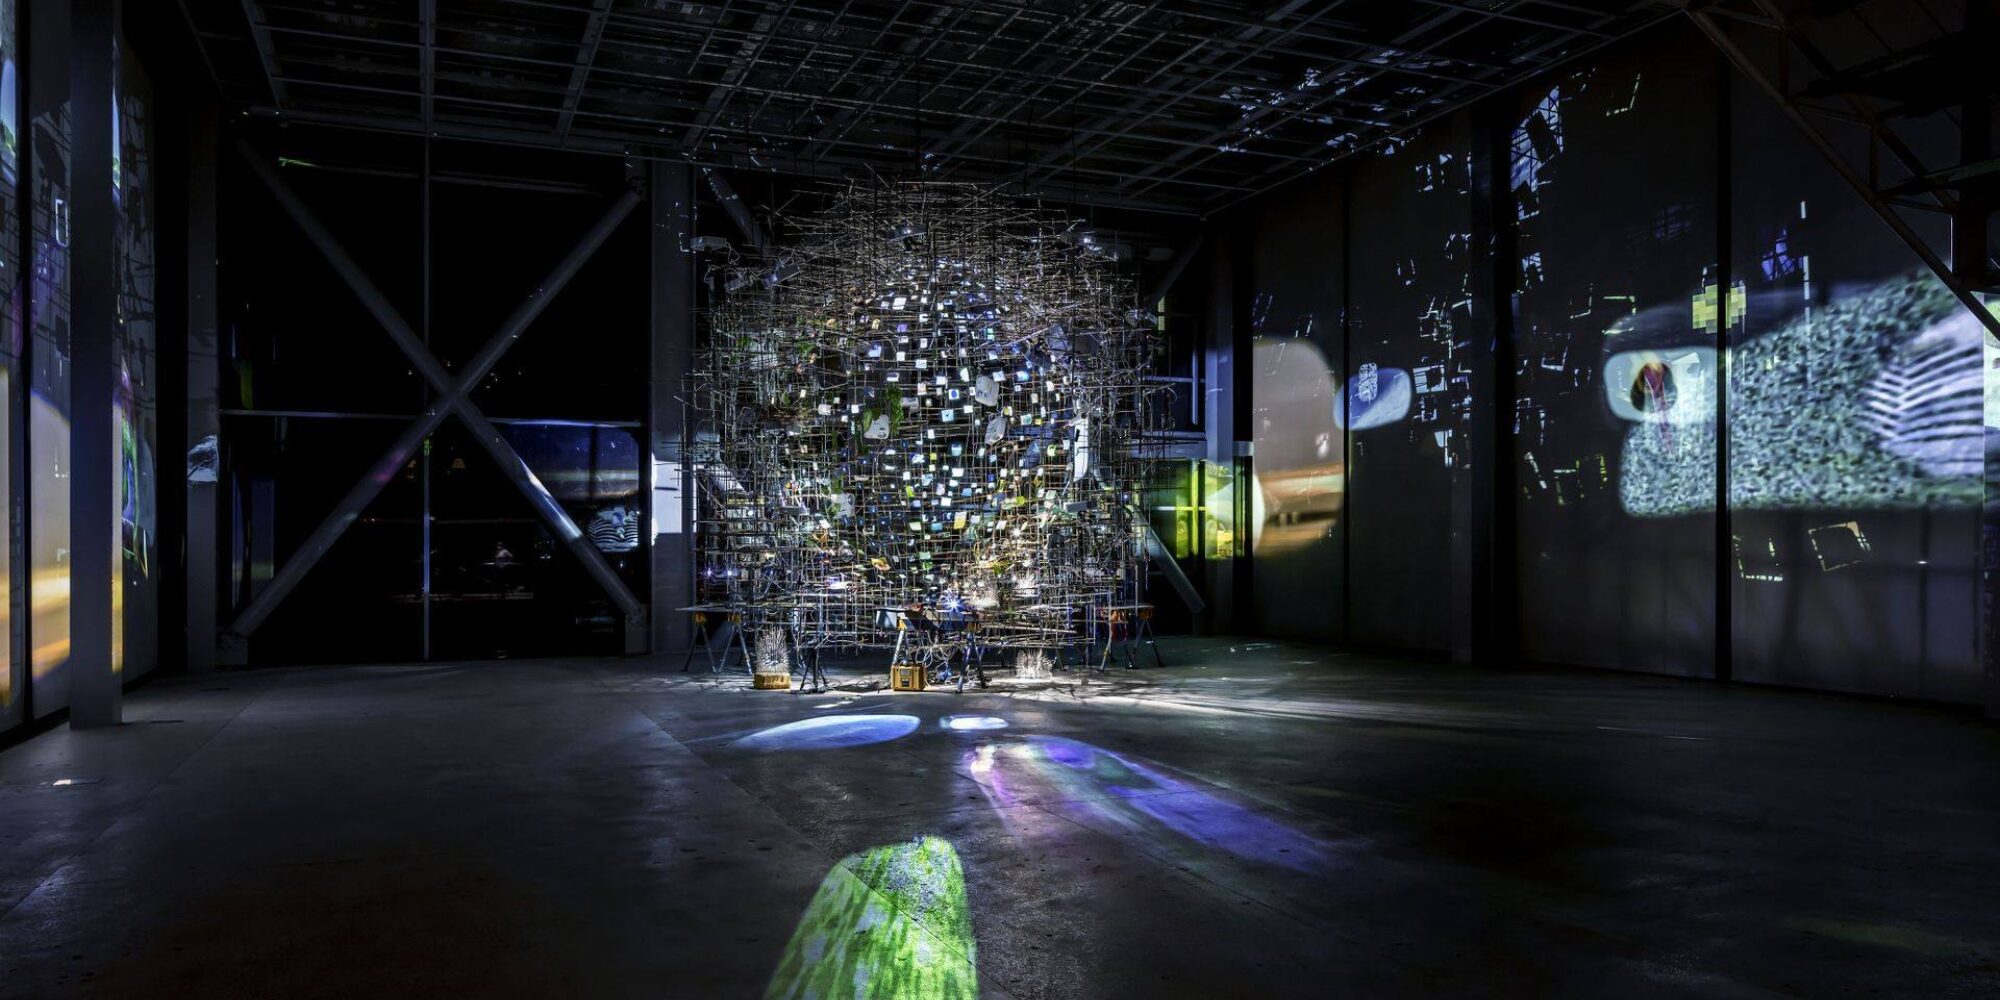 In a black gallery stands an orb-like structure of many small lights surrounded by scaffolding. Large projections of blue and white light project onto the floor, and scenes play on the left and right wall.